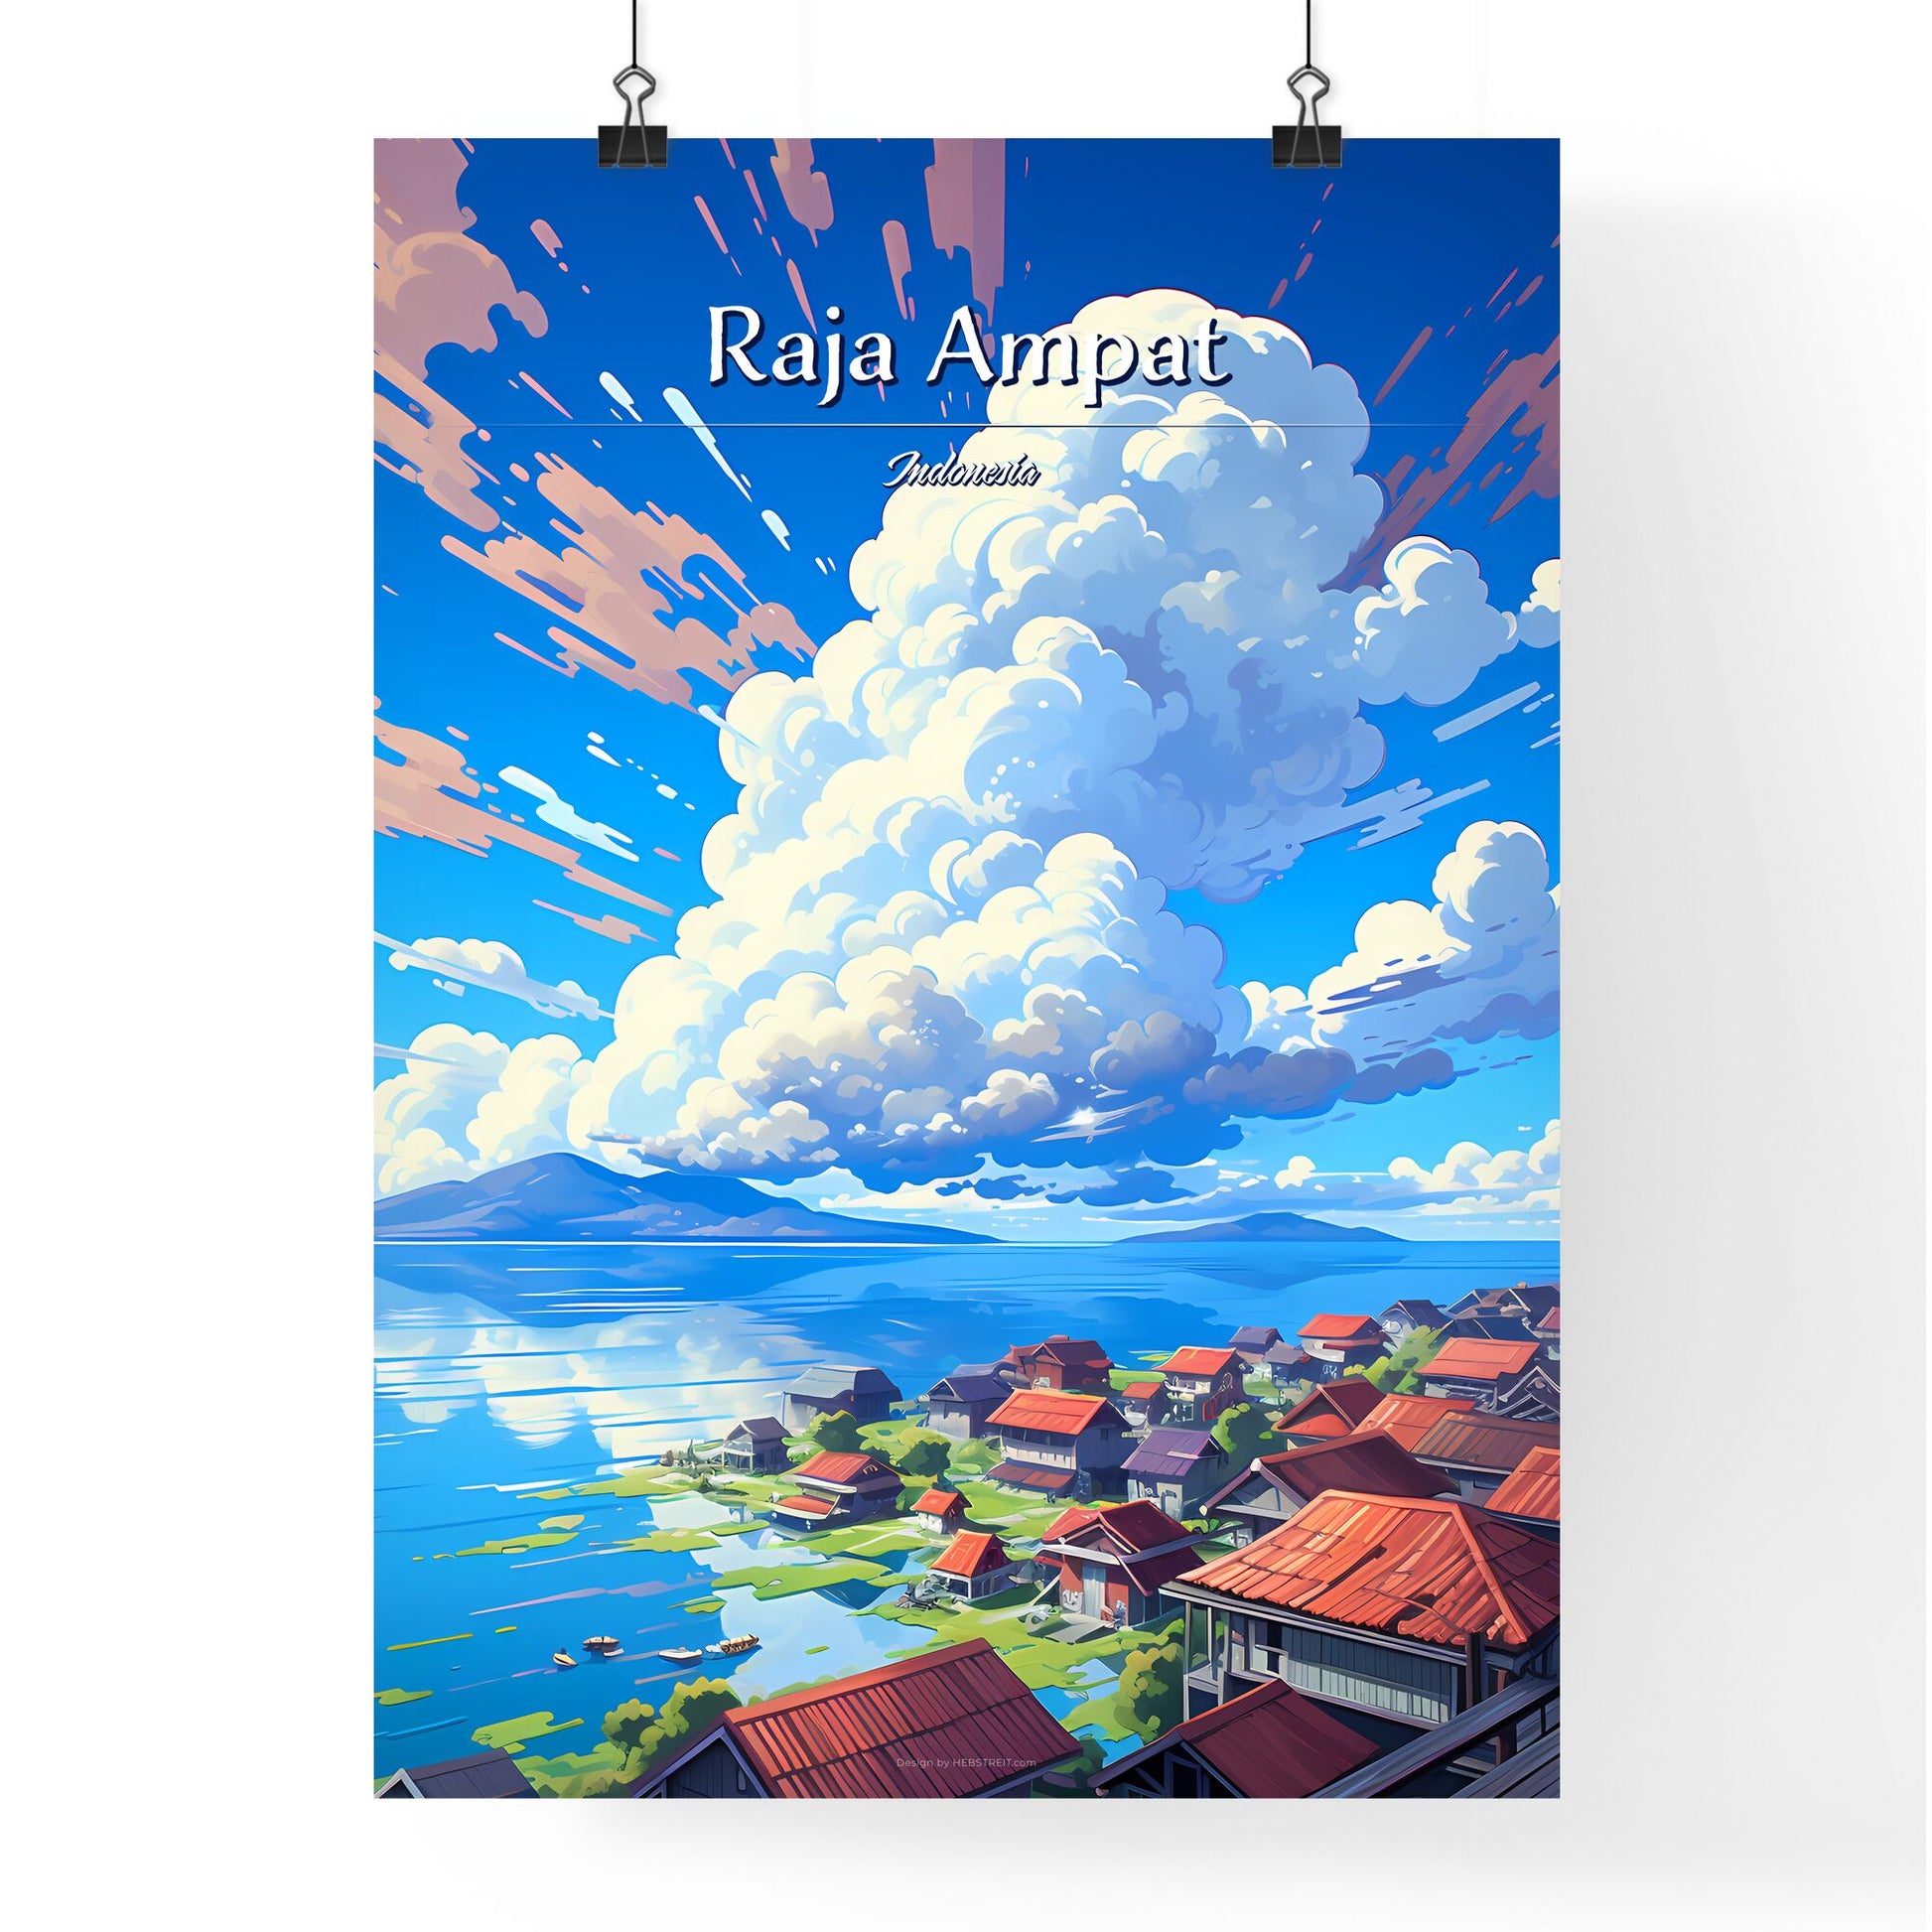 On the roofs of Raja Ampat, Indonesia - Art print of a landscape of a village with red roofs and a body of water Default Title